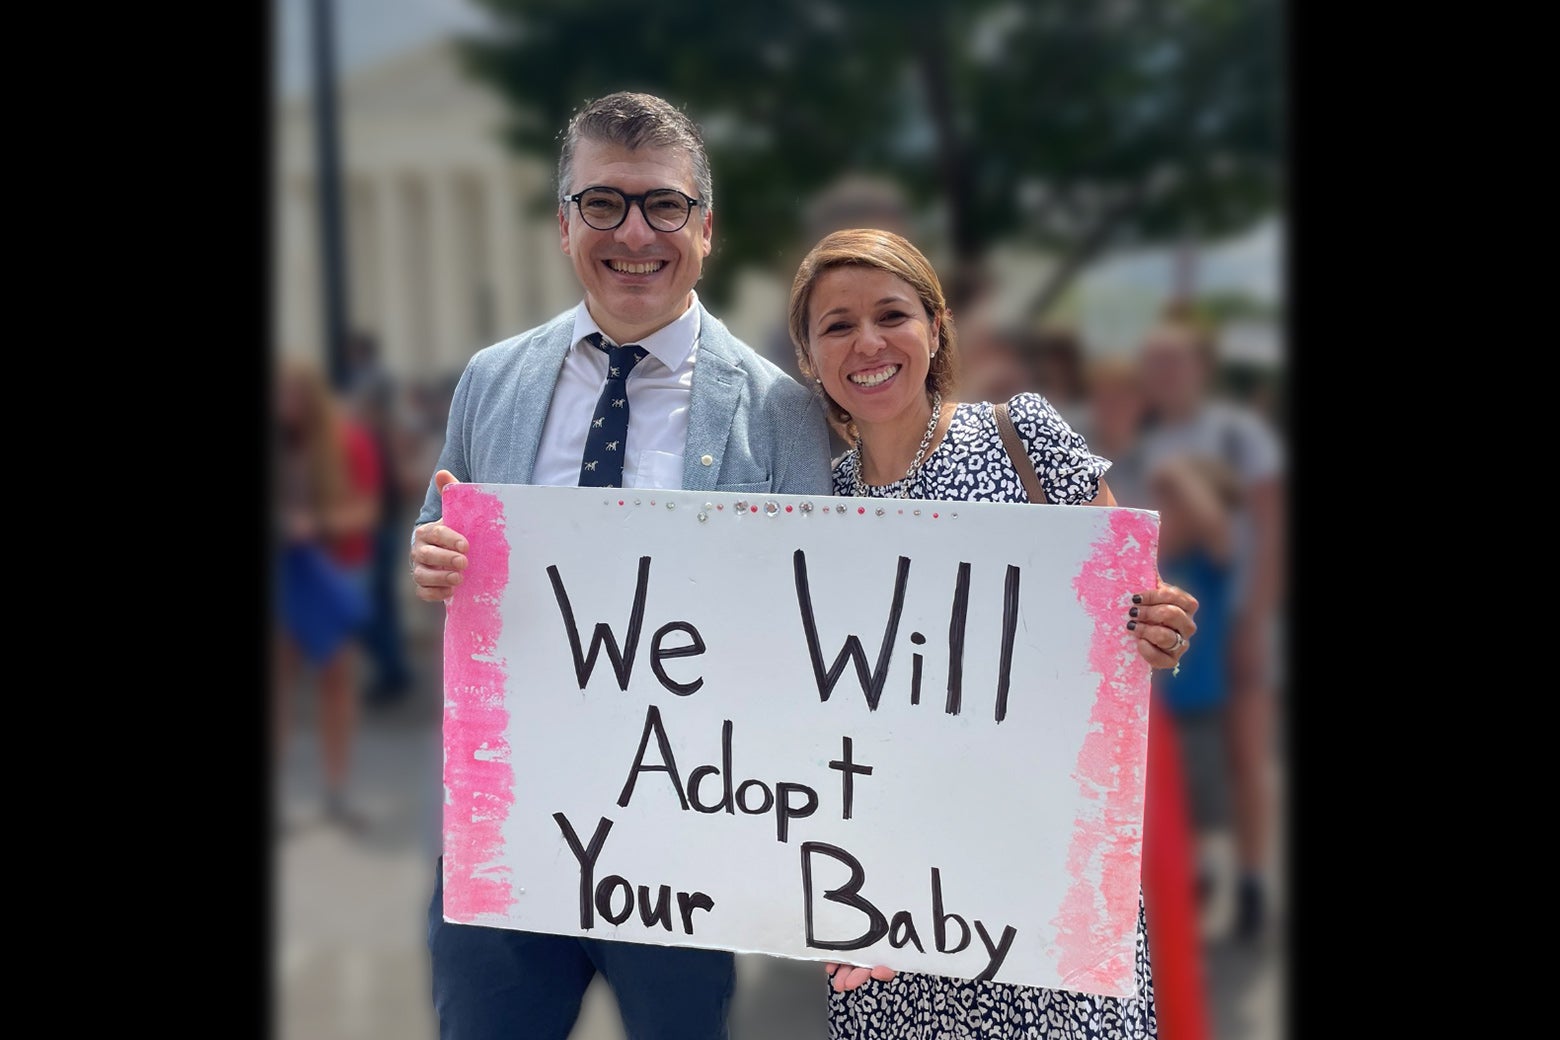 A photo of a couple holding a sign that says "We Will Adopt Your Baby" that was taken outside of the Supreme Court in Washington D.C. after Roe v Wade was overturned.